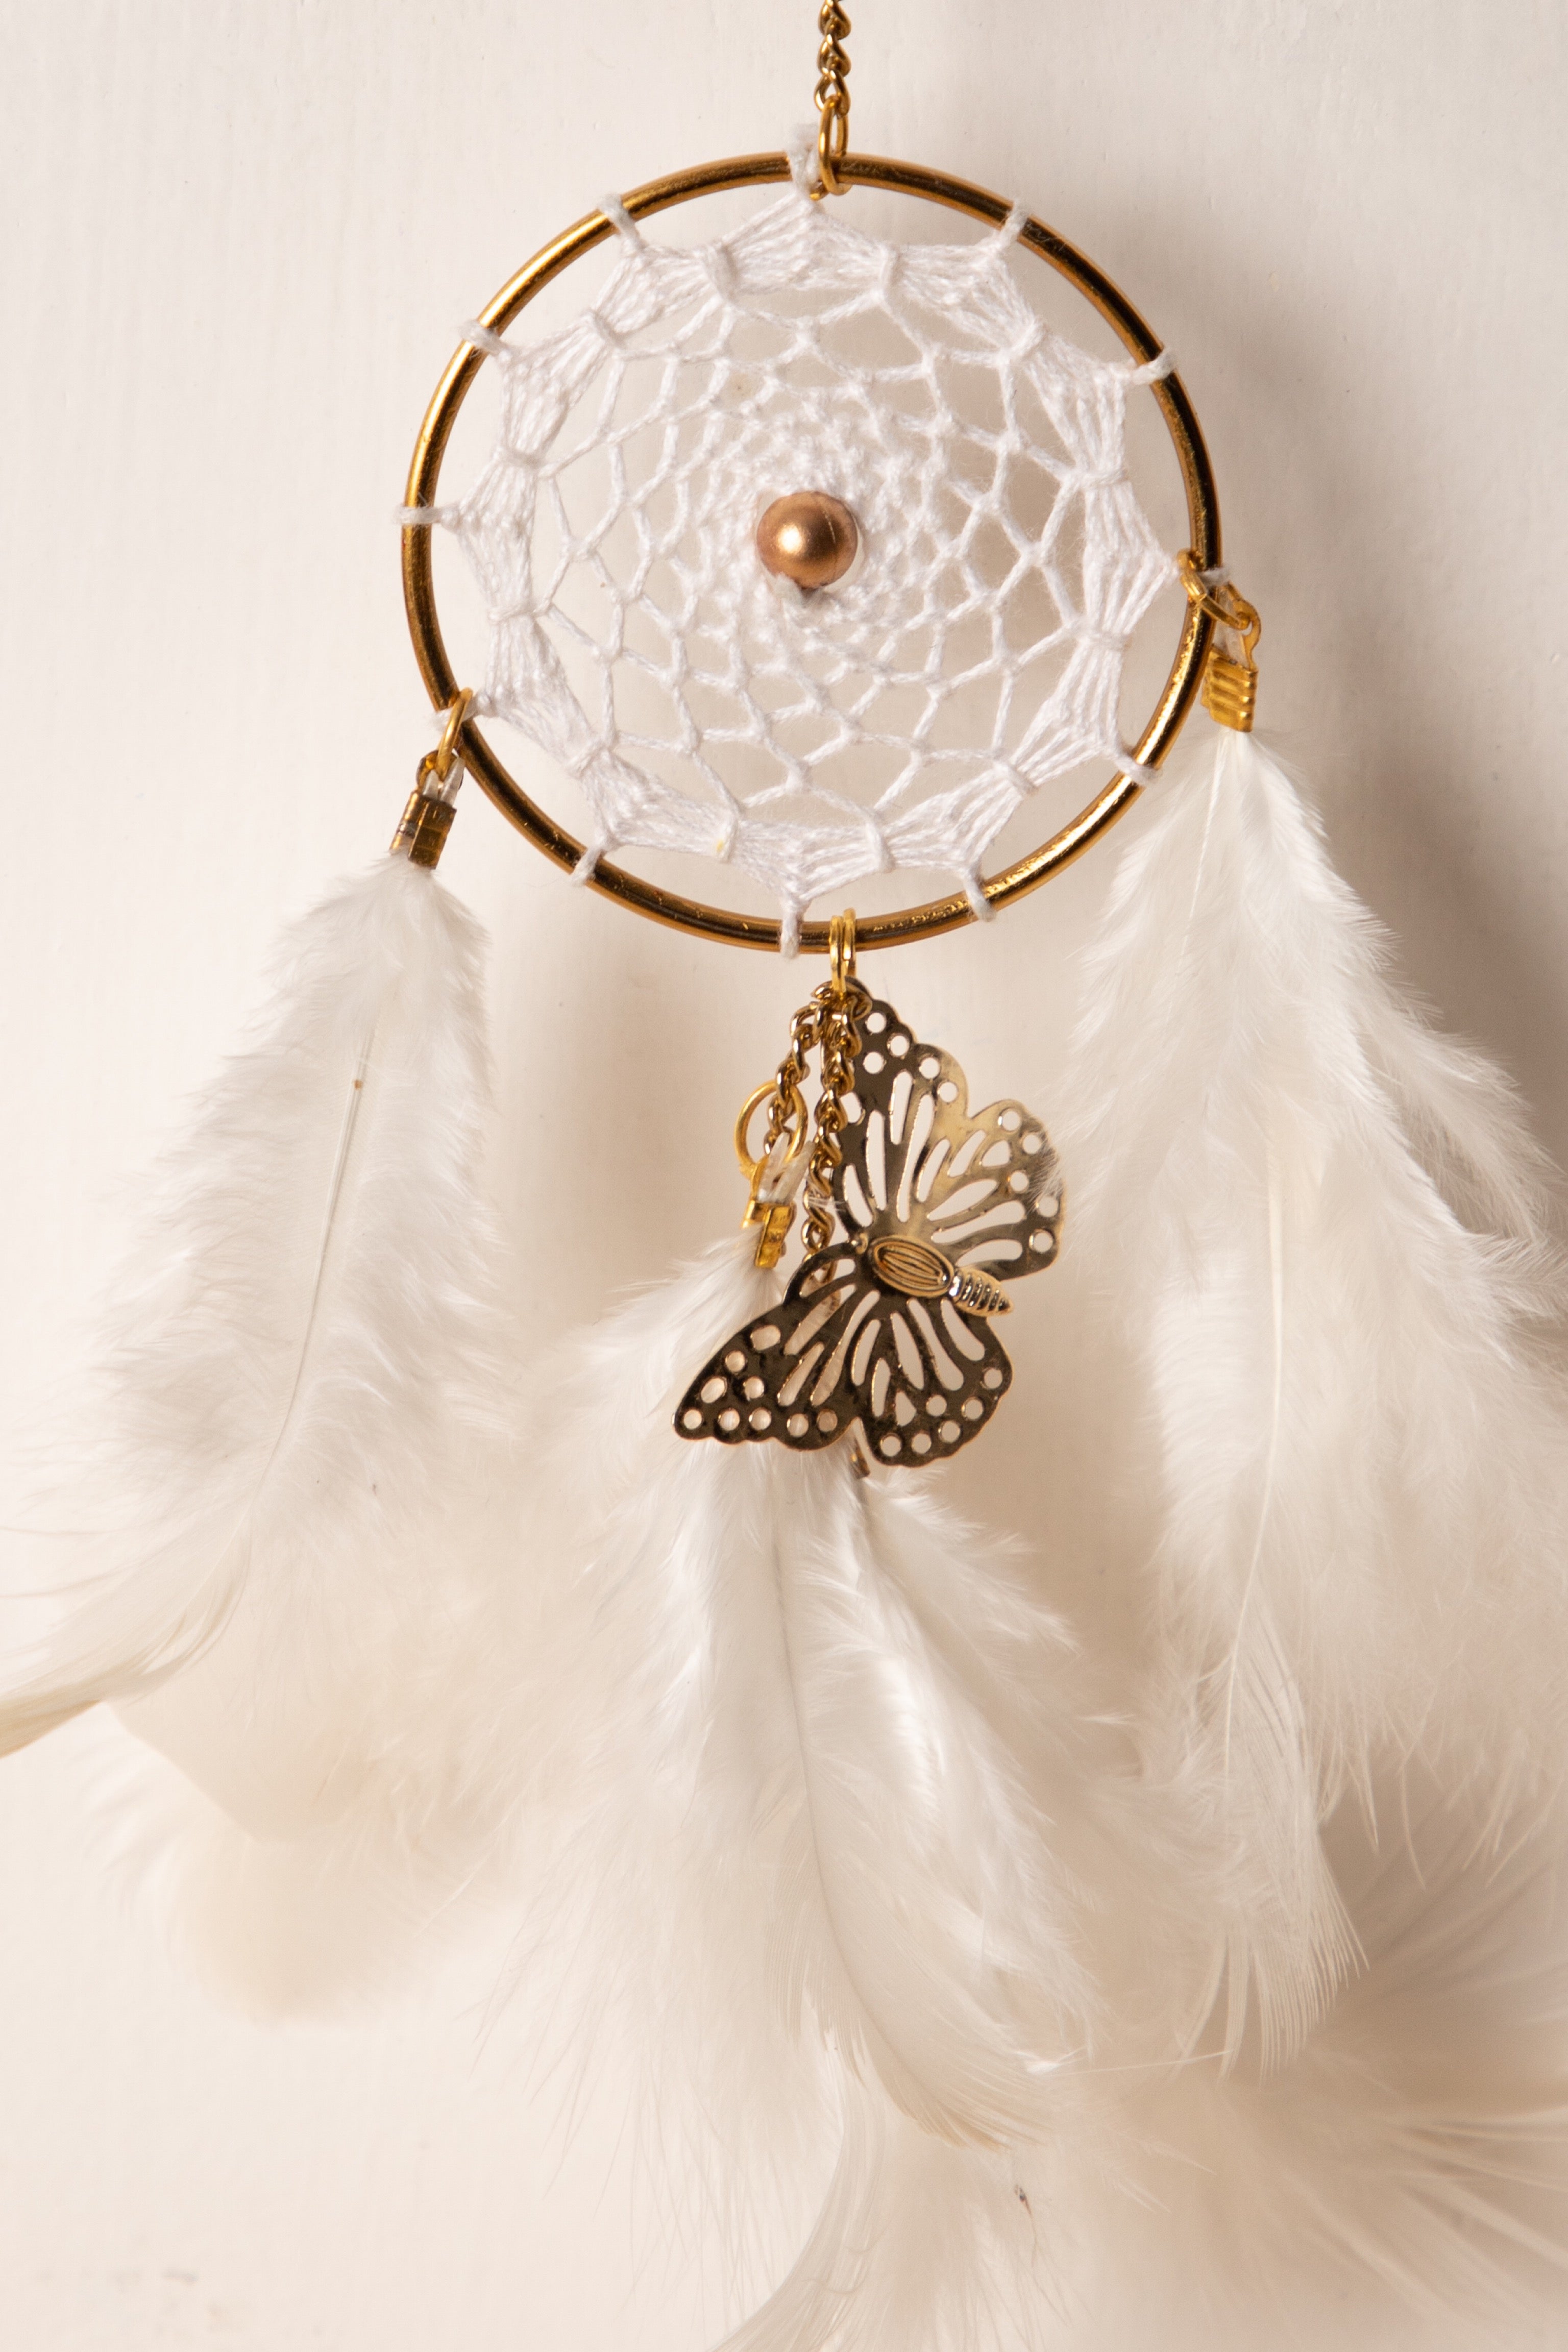 Buy Handcrafted Dream Catchers online – Soul Works – Tagged 